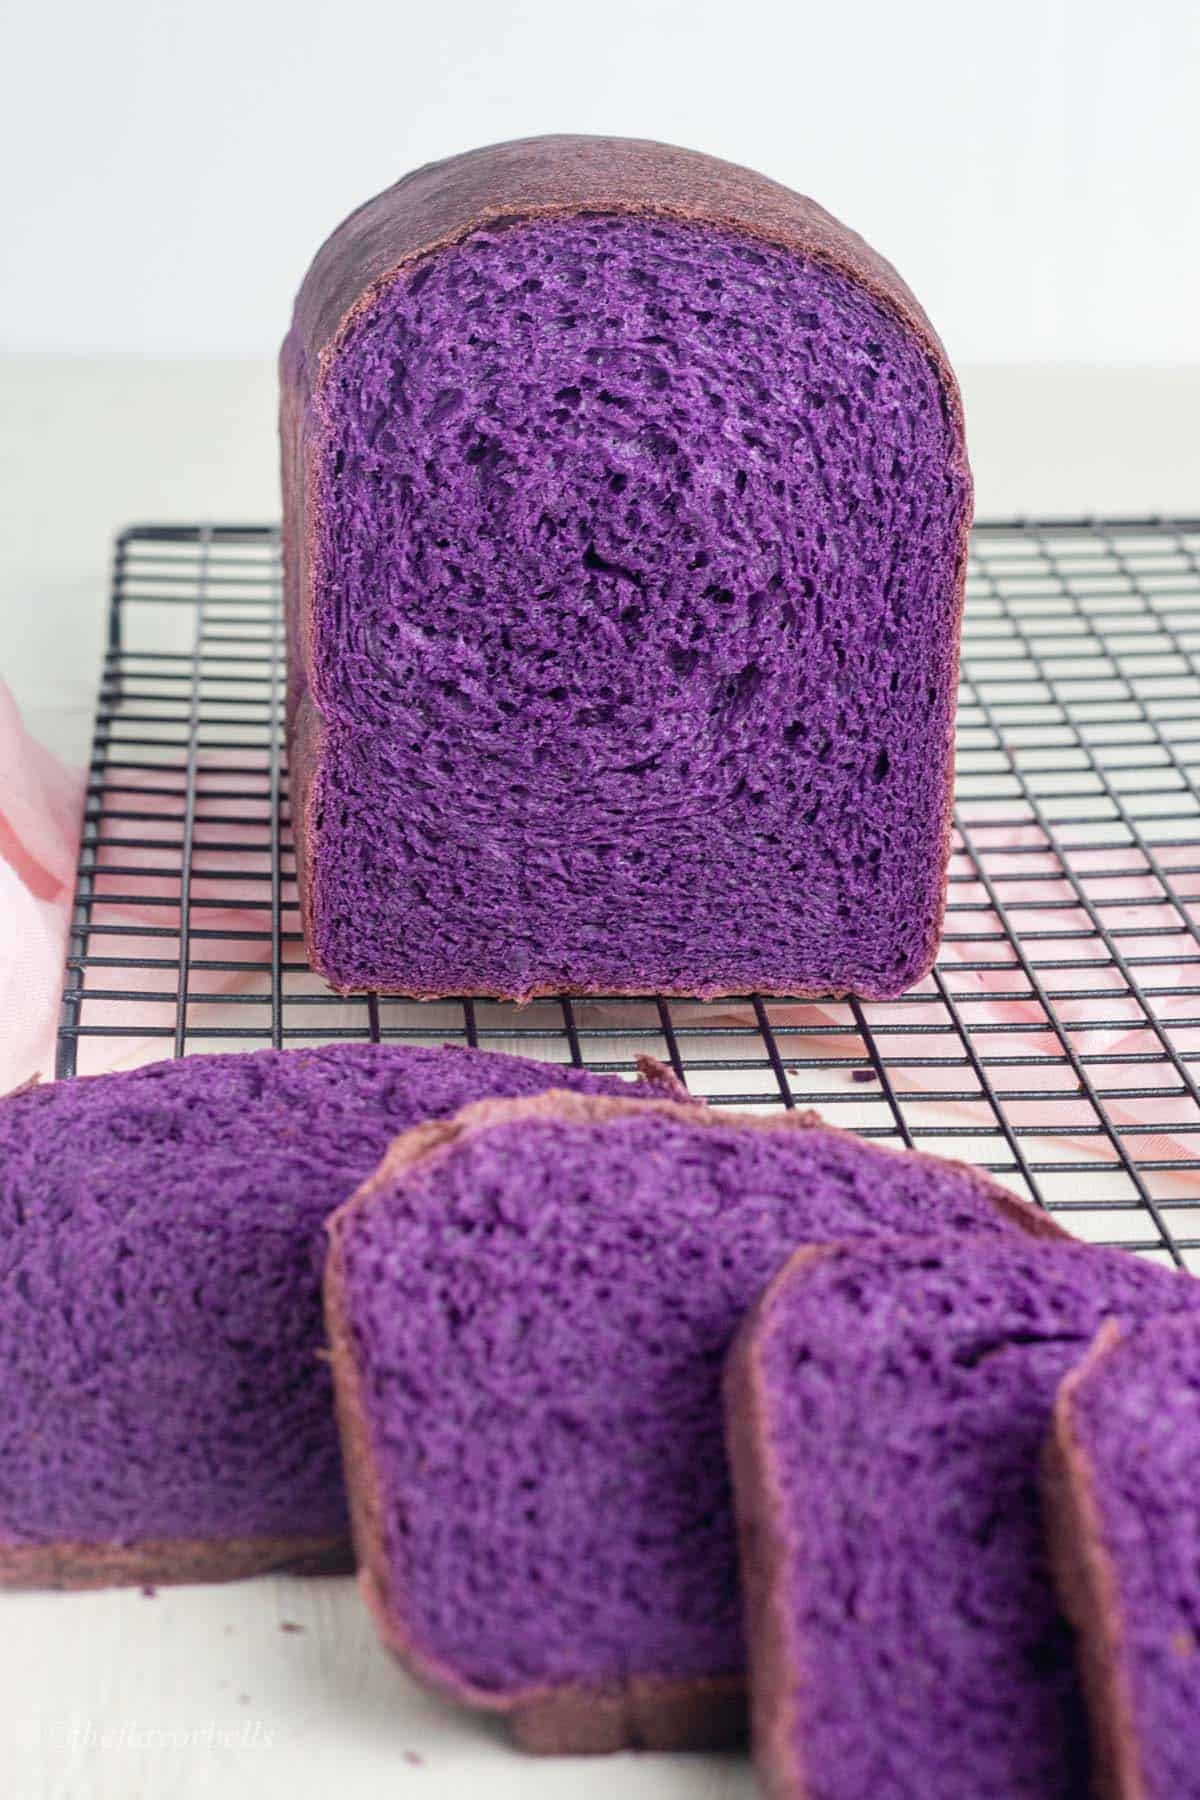 purple yam bread on a wire cooling rack